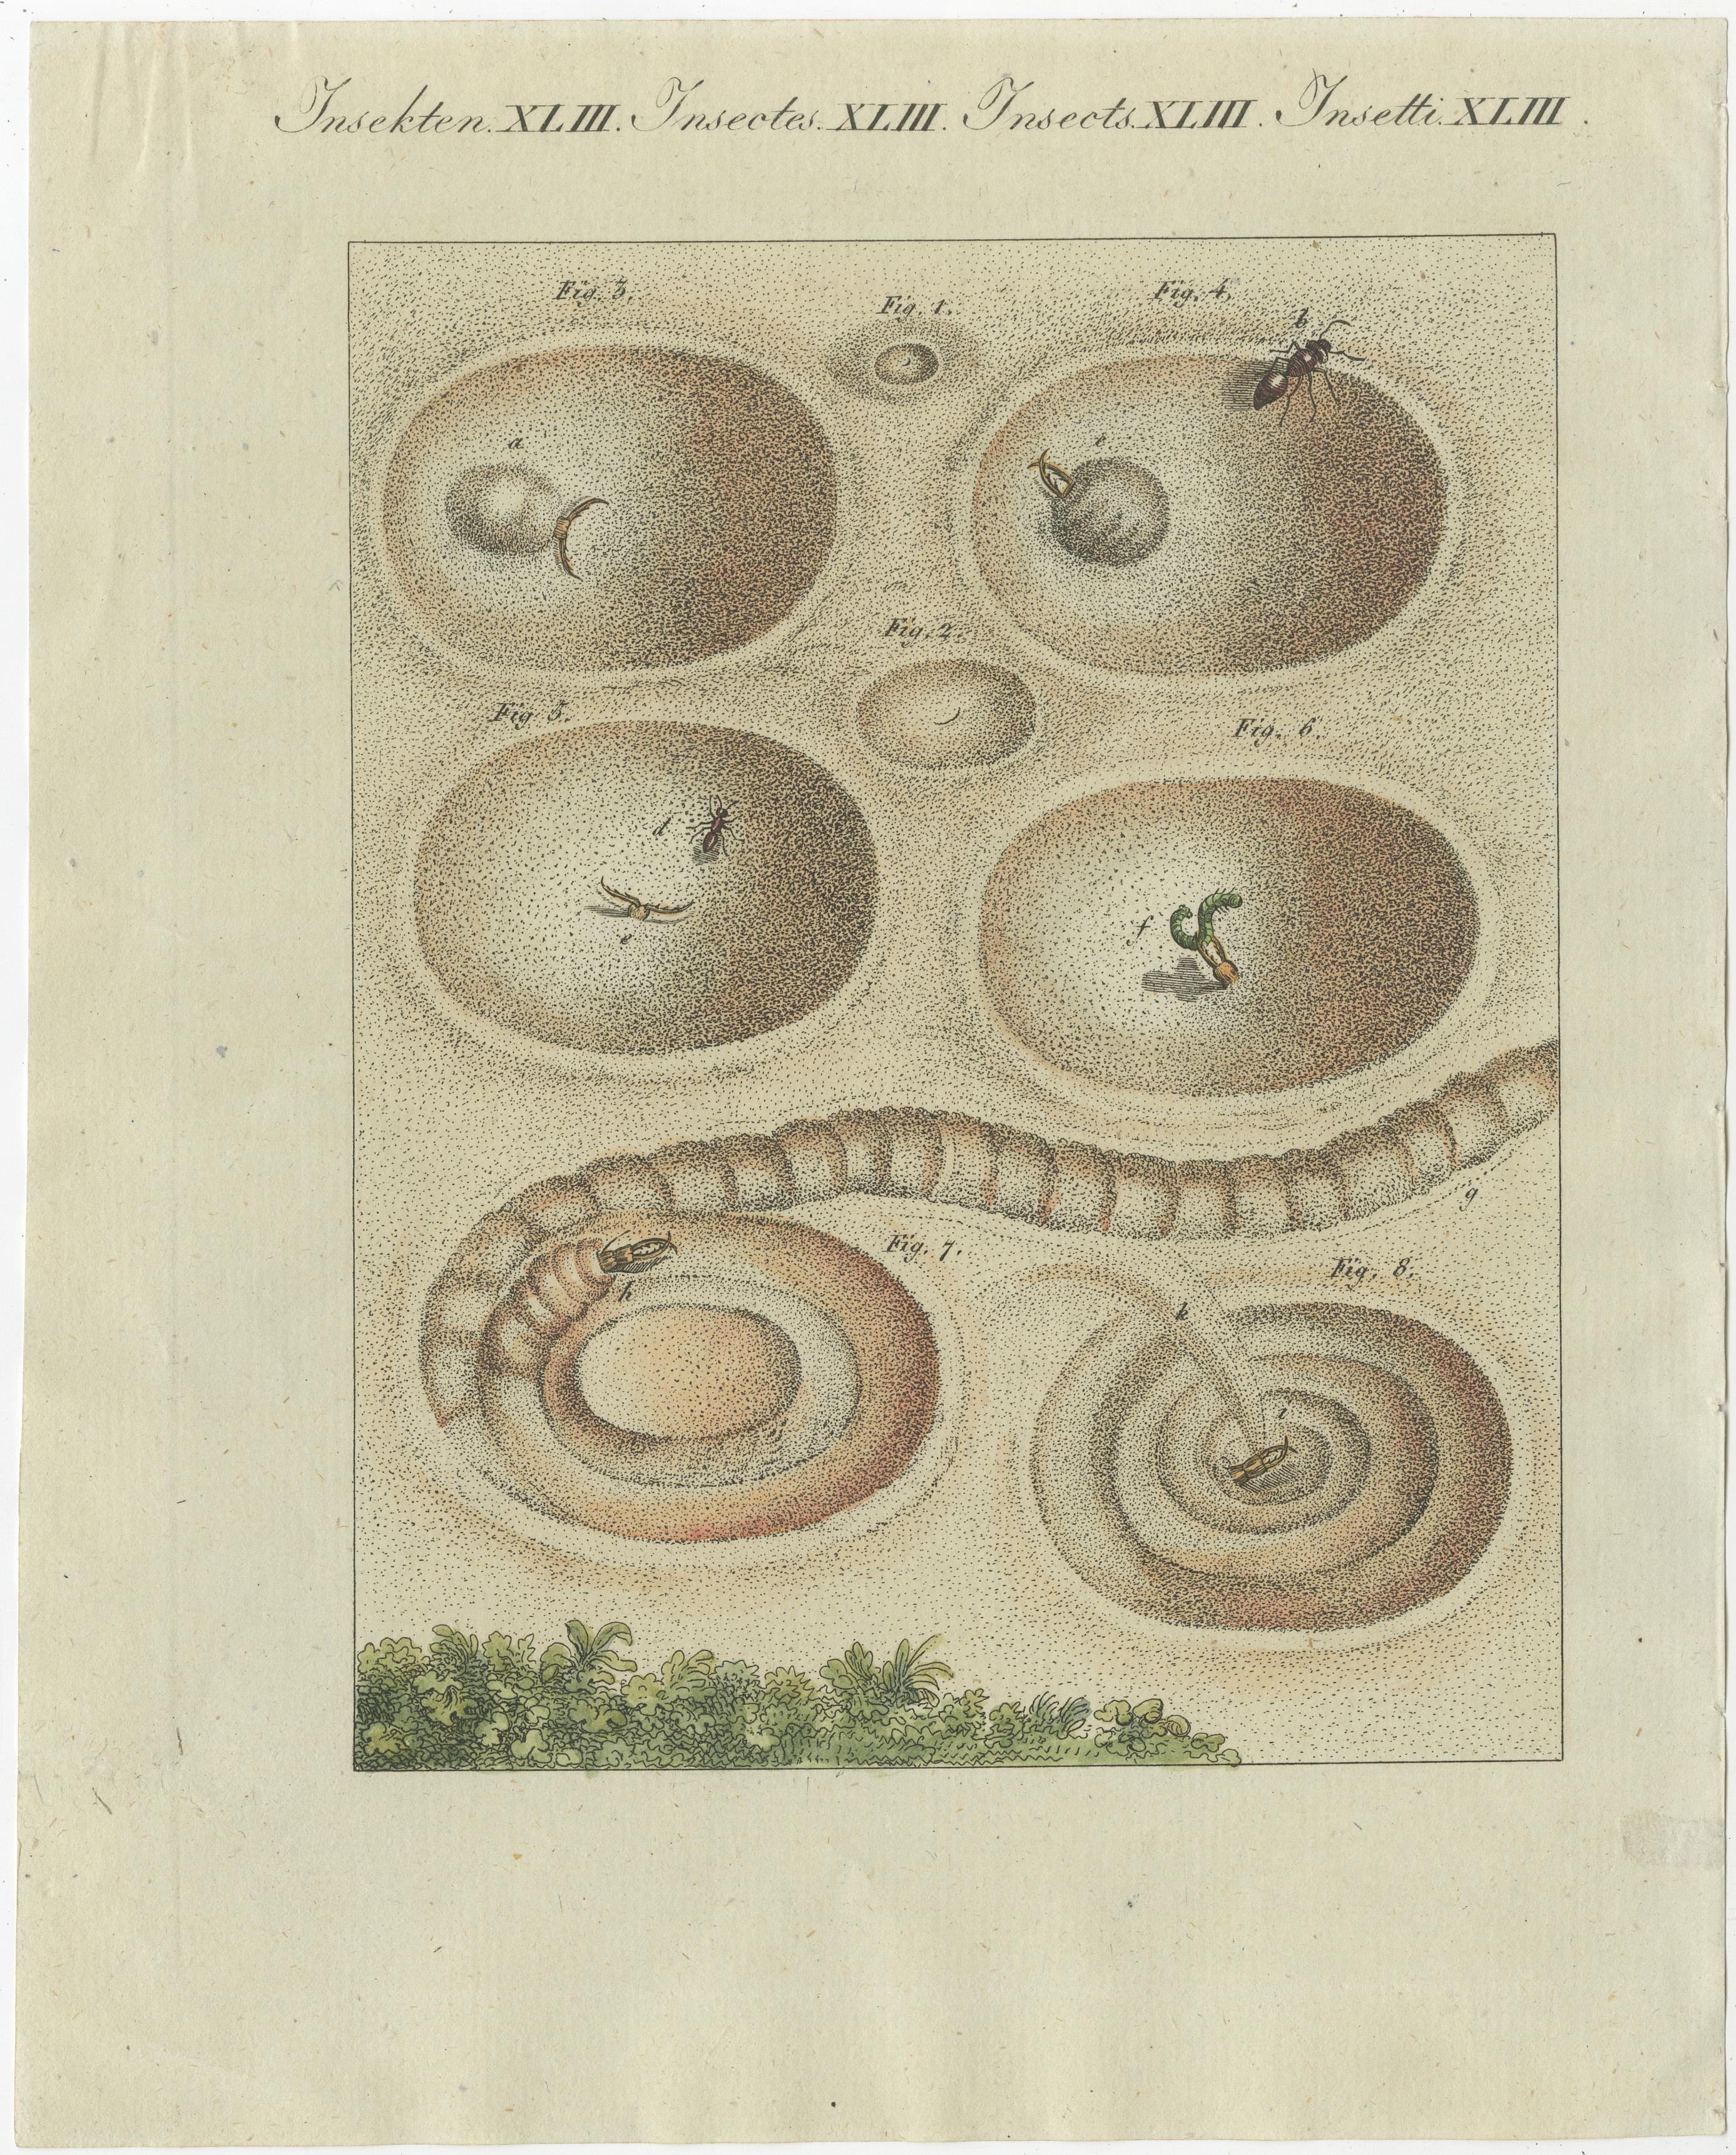 Antique print showing a lion ant (ant lion) creating a funnel shaped trap in sand and capturing its prey. This print originates from 'Bilderbuch fur Kinder' by F.J. Bertuch. Friedrich Johann Bertuch (1747-1822) was a German publisher and man of arts